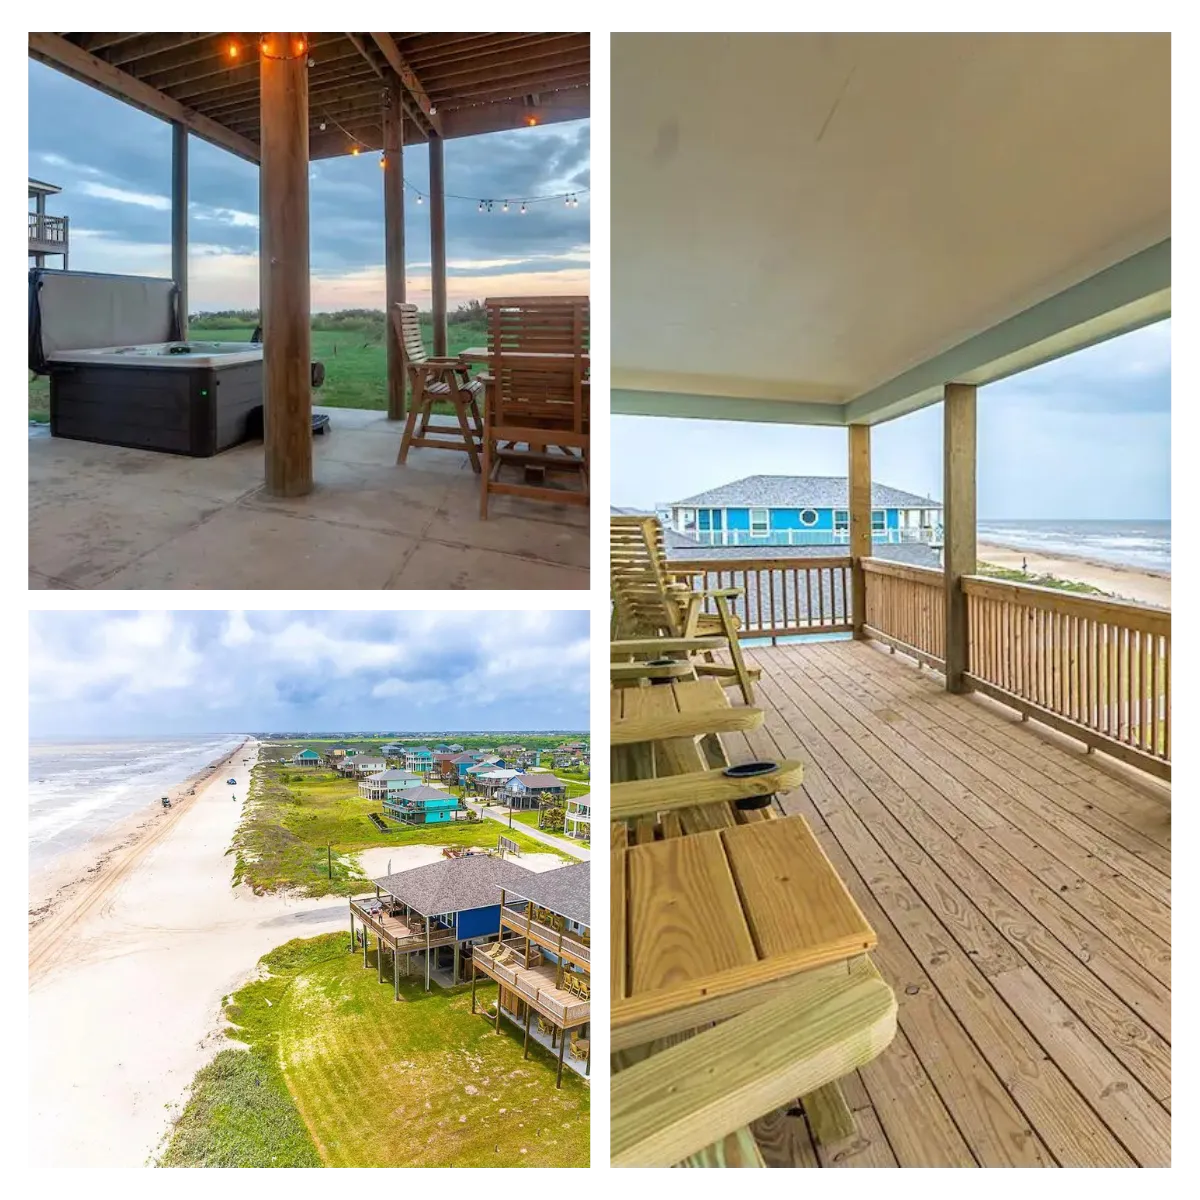 Redfish Retreat offers a spacious 5-bedroom, 3.5-bathroom getaway for 16+ guests, featuring an open game/bunk room for added fun, high-speed Wi-Fi, cozy rustic interiors, and provided linens and household essentials.